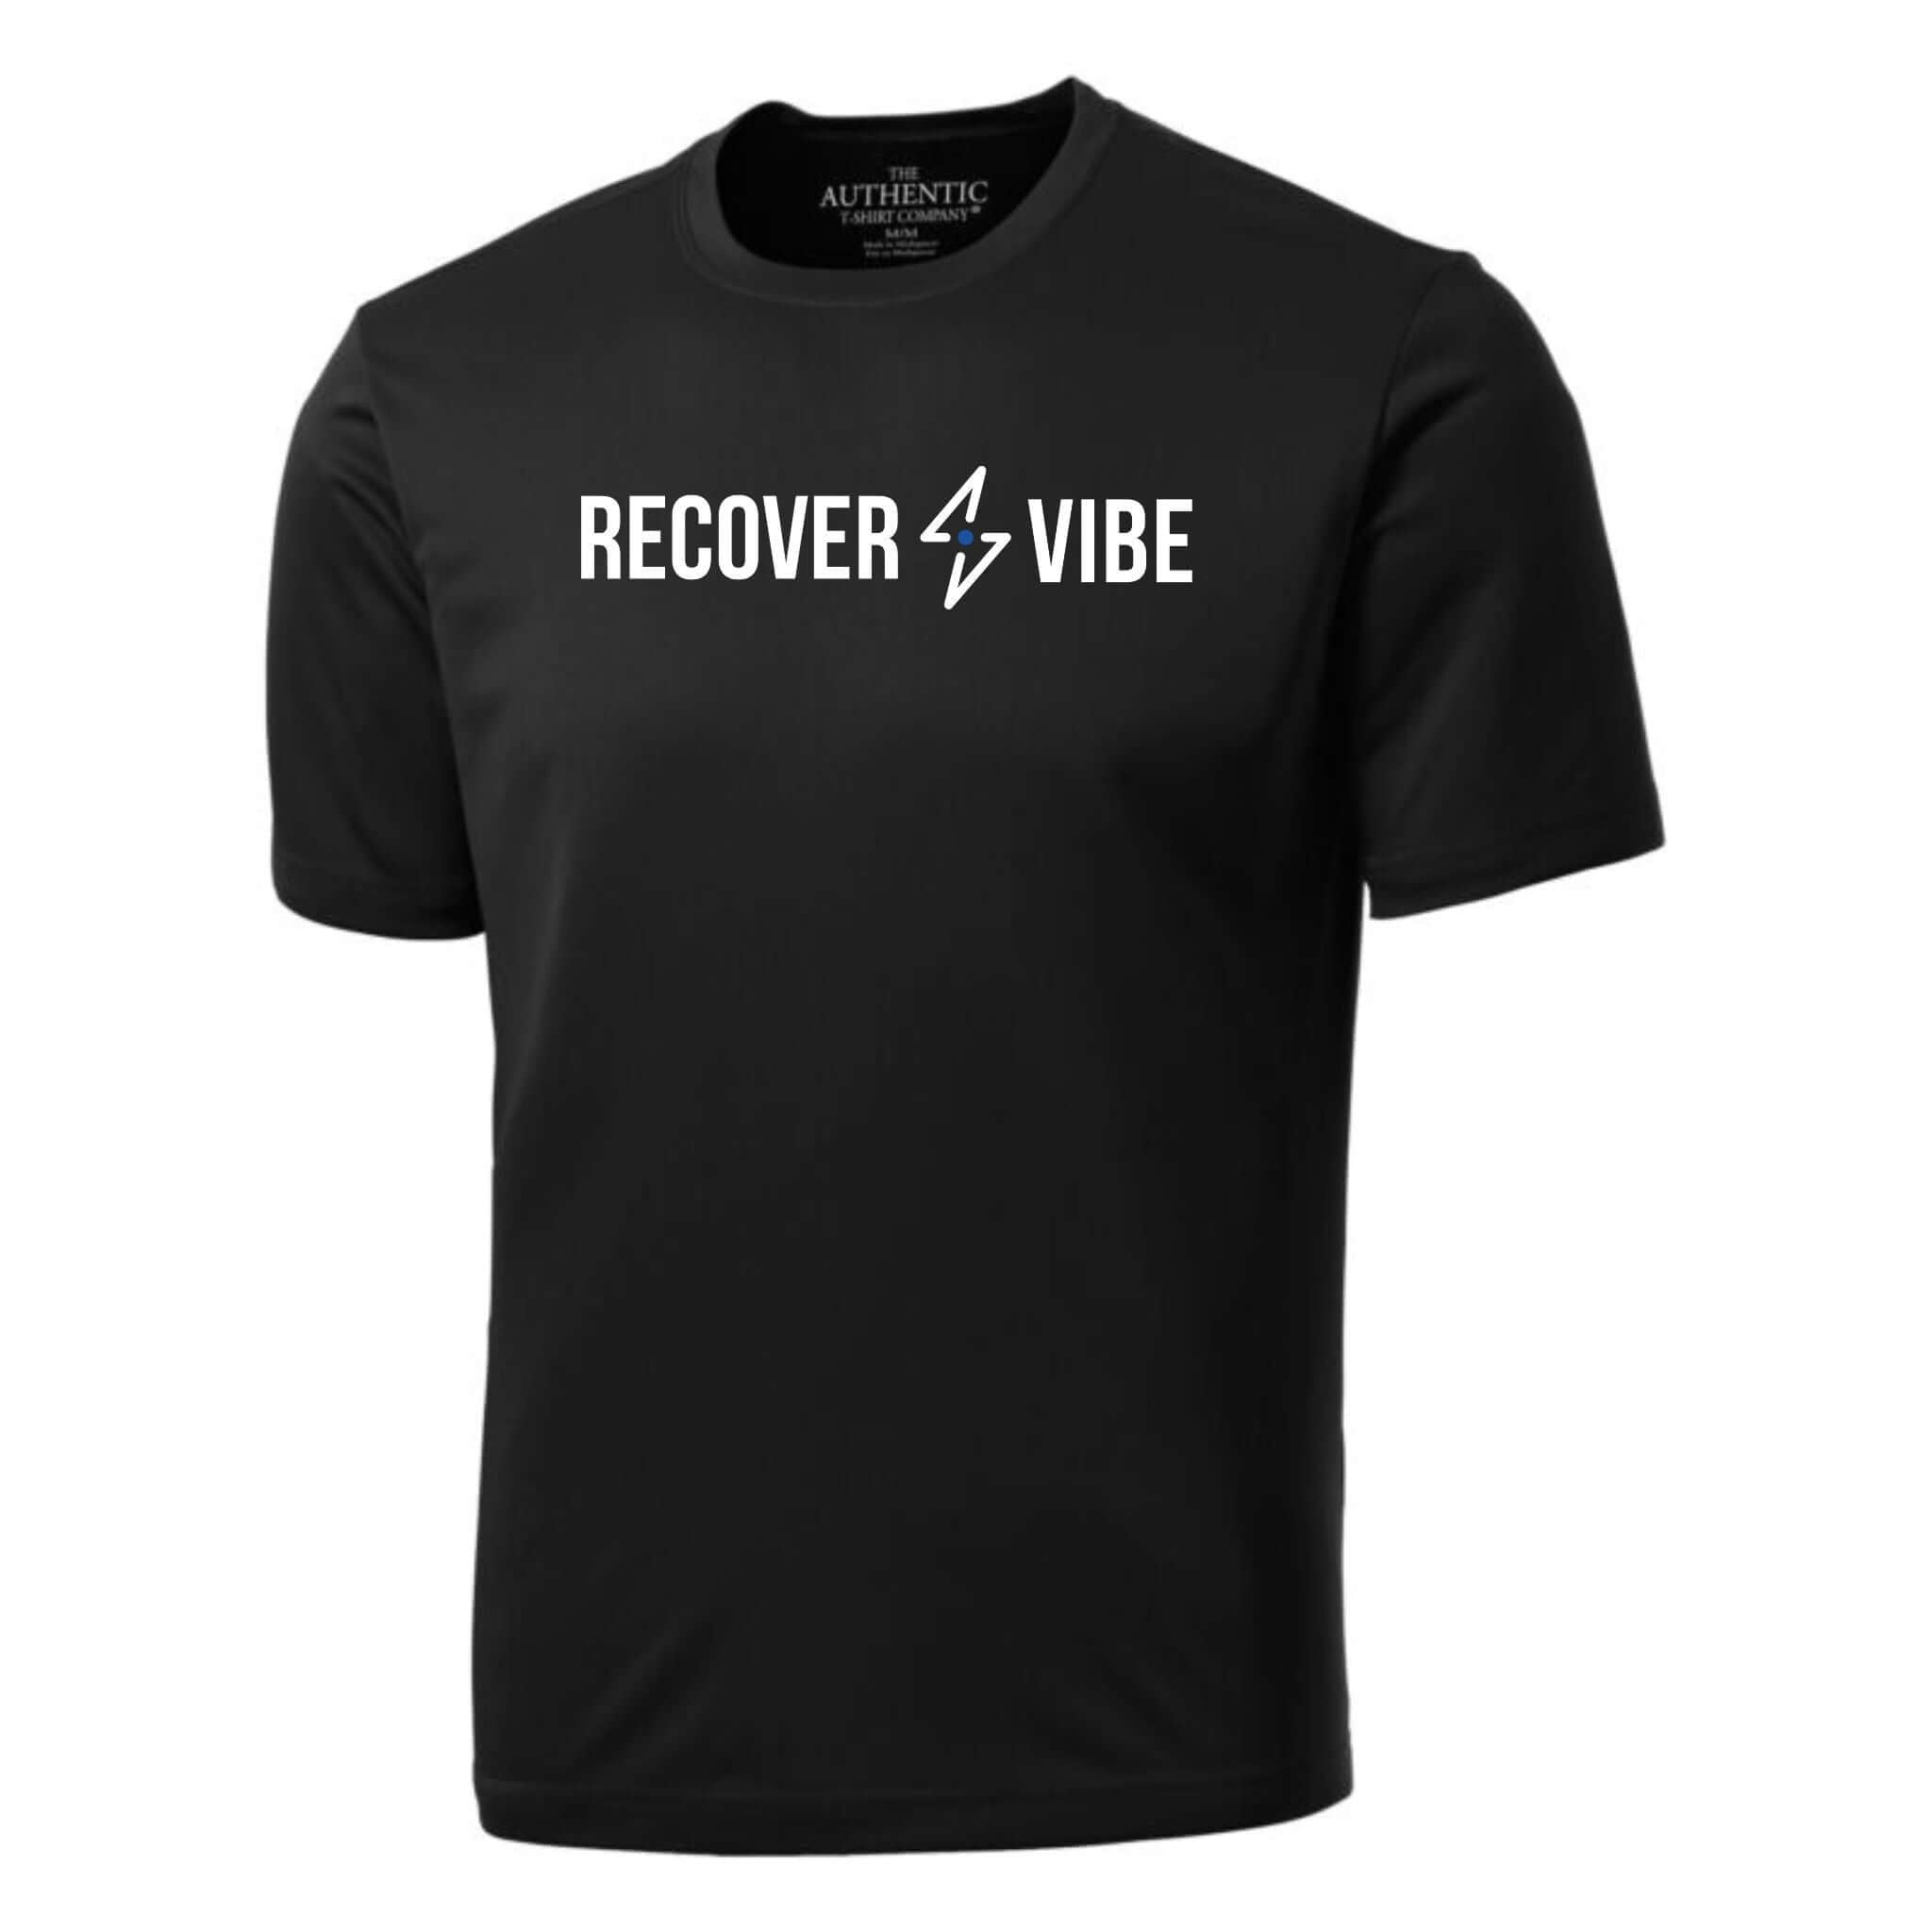 recover vibe athletic tee